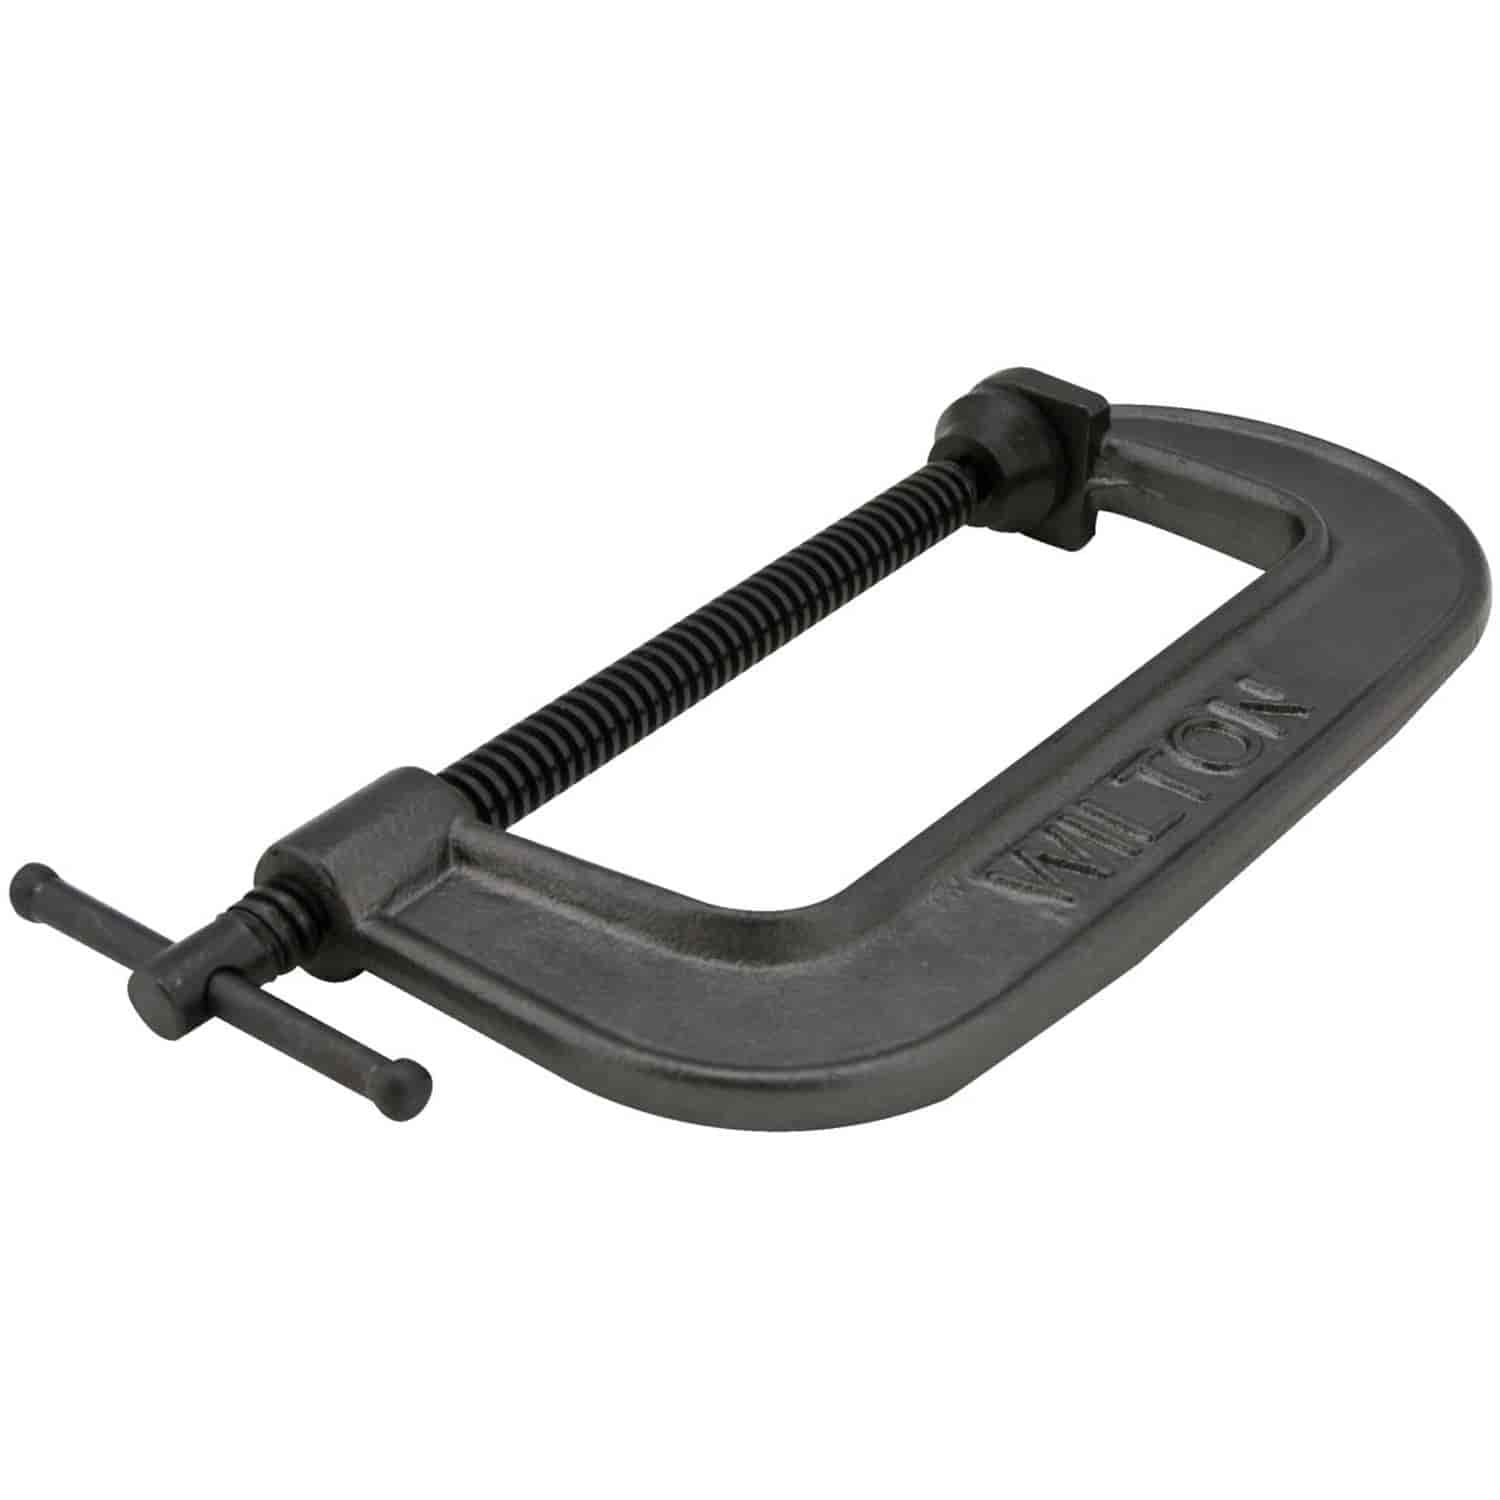 540A Series C-Clamp Opening Capacity Max: 6"